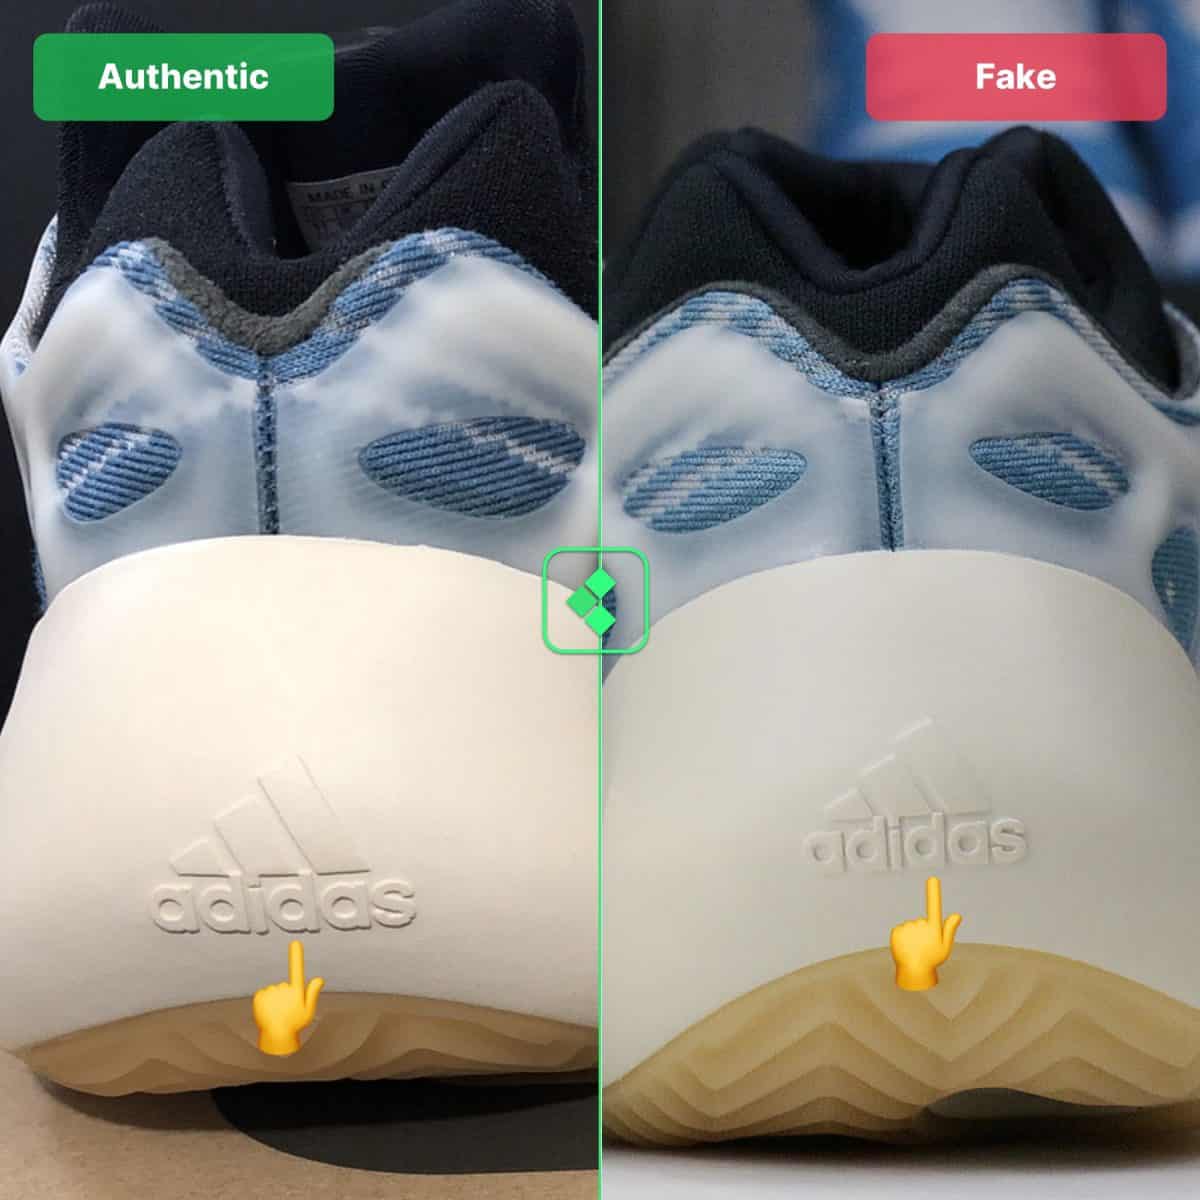 yeezy kyanite authentication guide